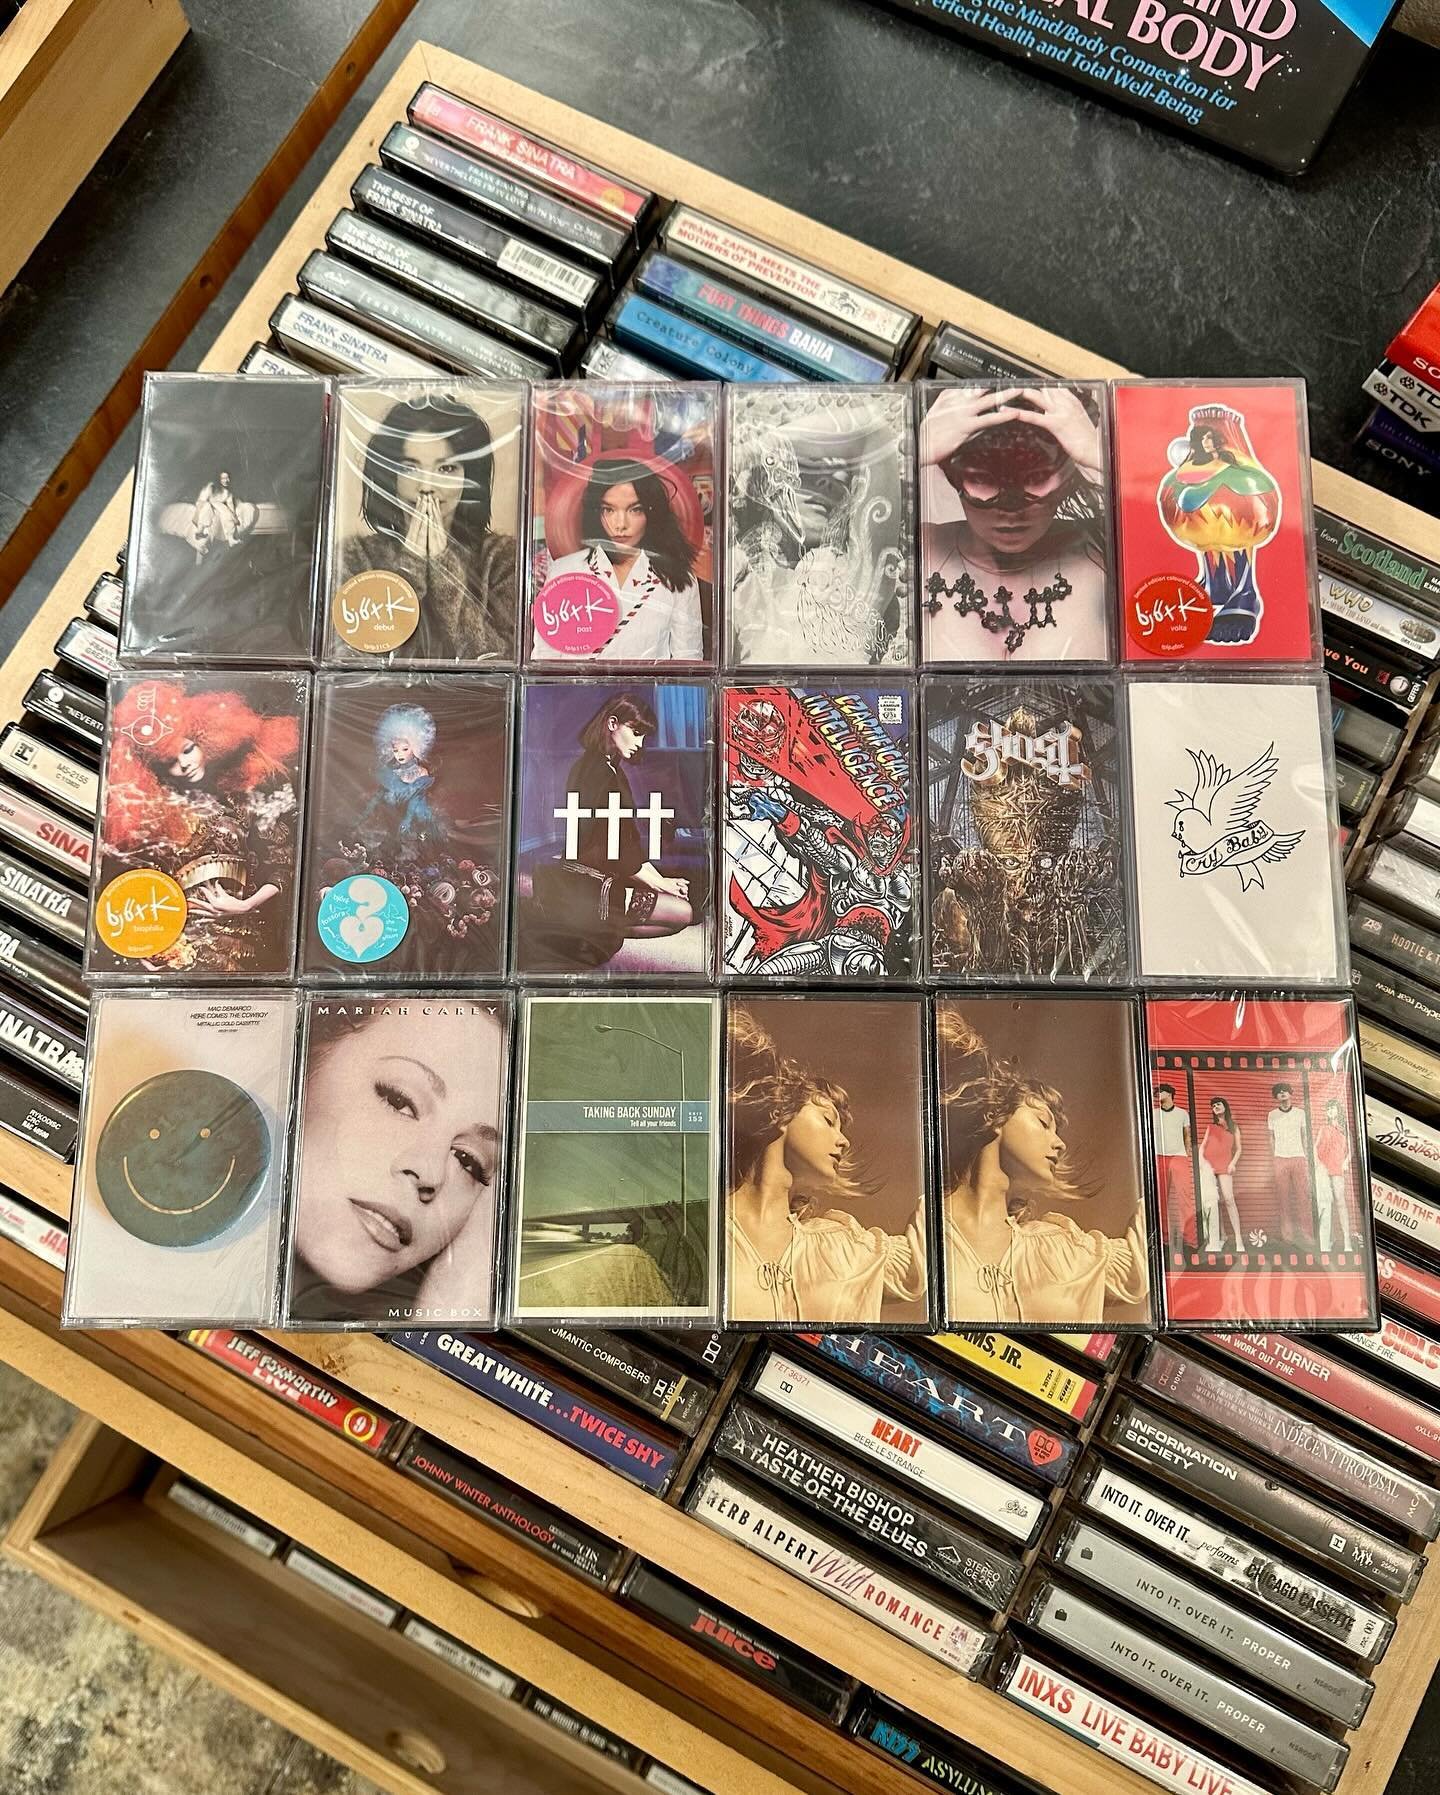 More new and used cassette tapes added to the shop this morning! We&rsquo;re open from 10-6 with live music starting at 4pm&mdash; join us for a special Sunday matinee show 🤘